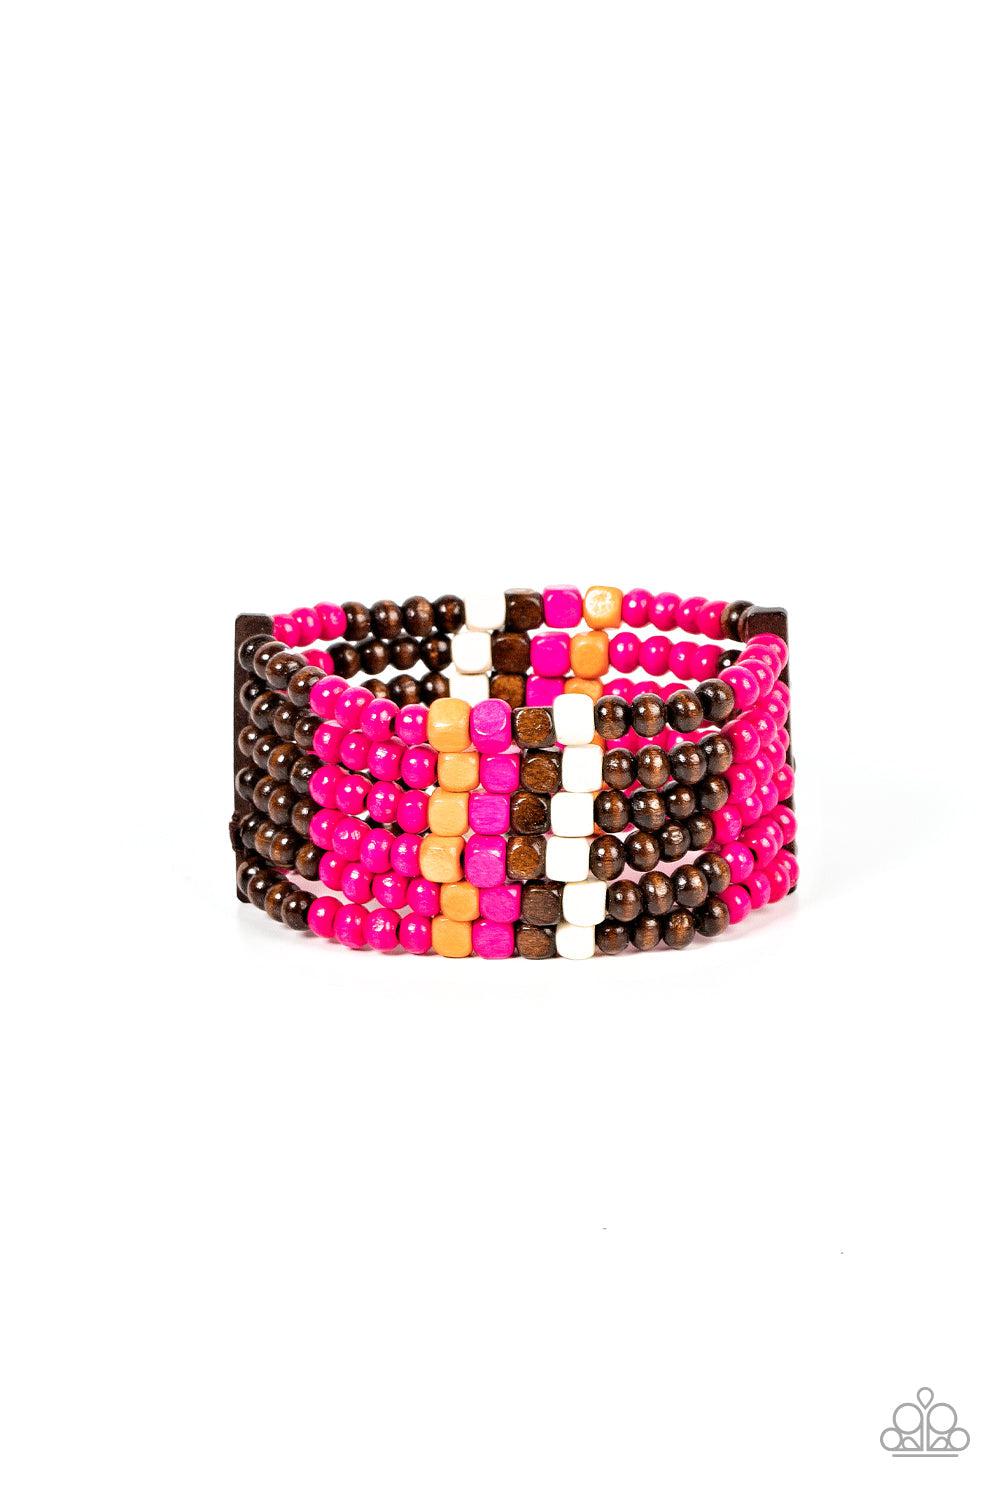 Dive into Maldives Pink & Brown Wood Bracelet - Paparazzi Accessories- lightbox - CarasShop.com - $5 Jewelry by Cara Jewels